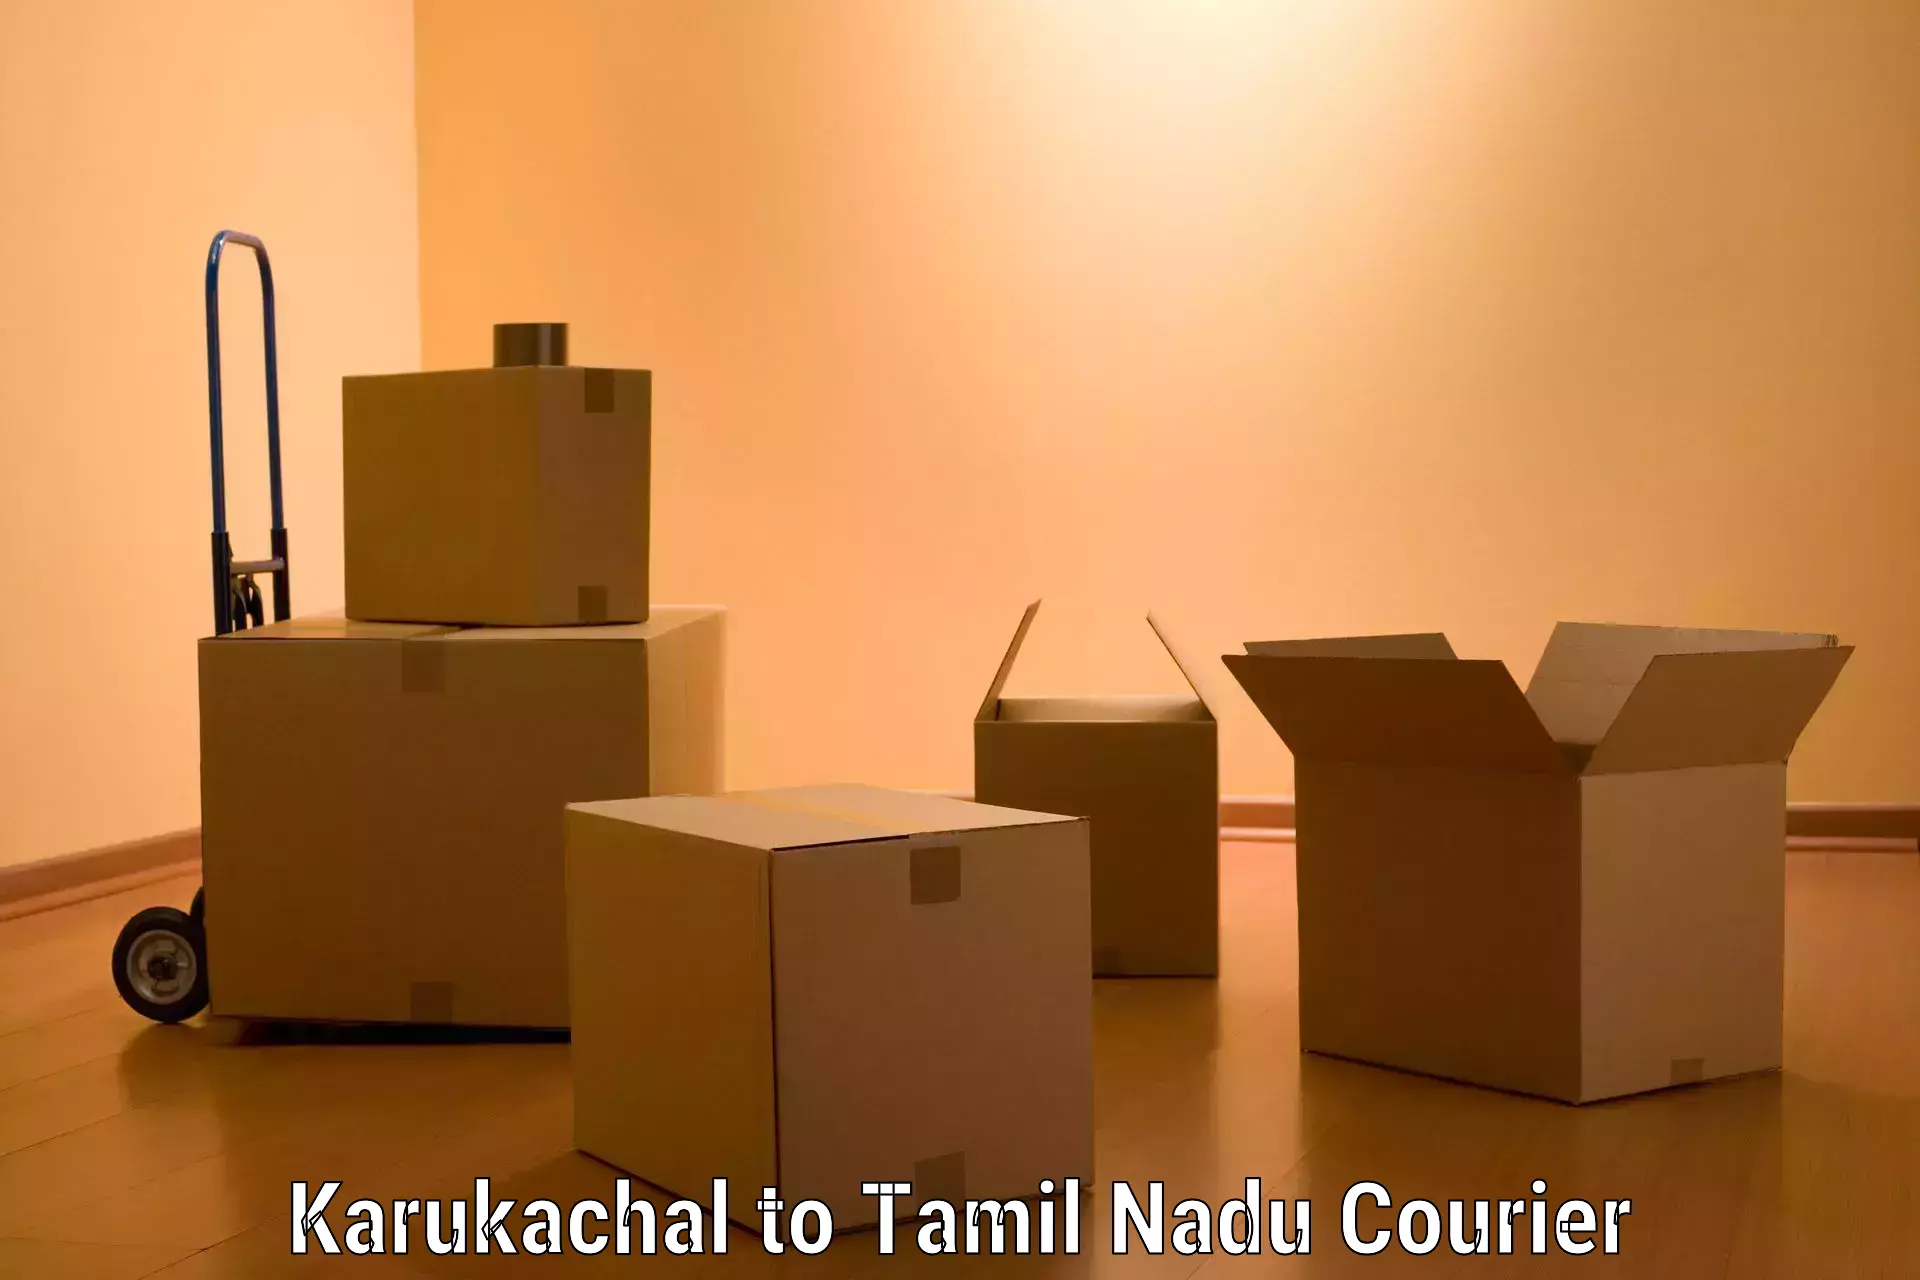 Quality moving company Karukachal to The Gandhigram Rural Institute